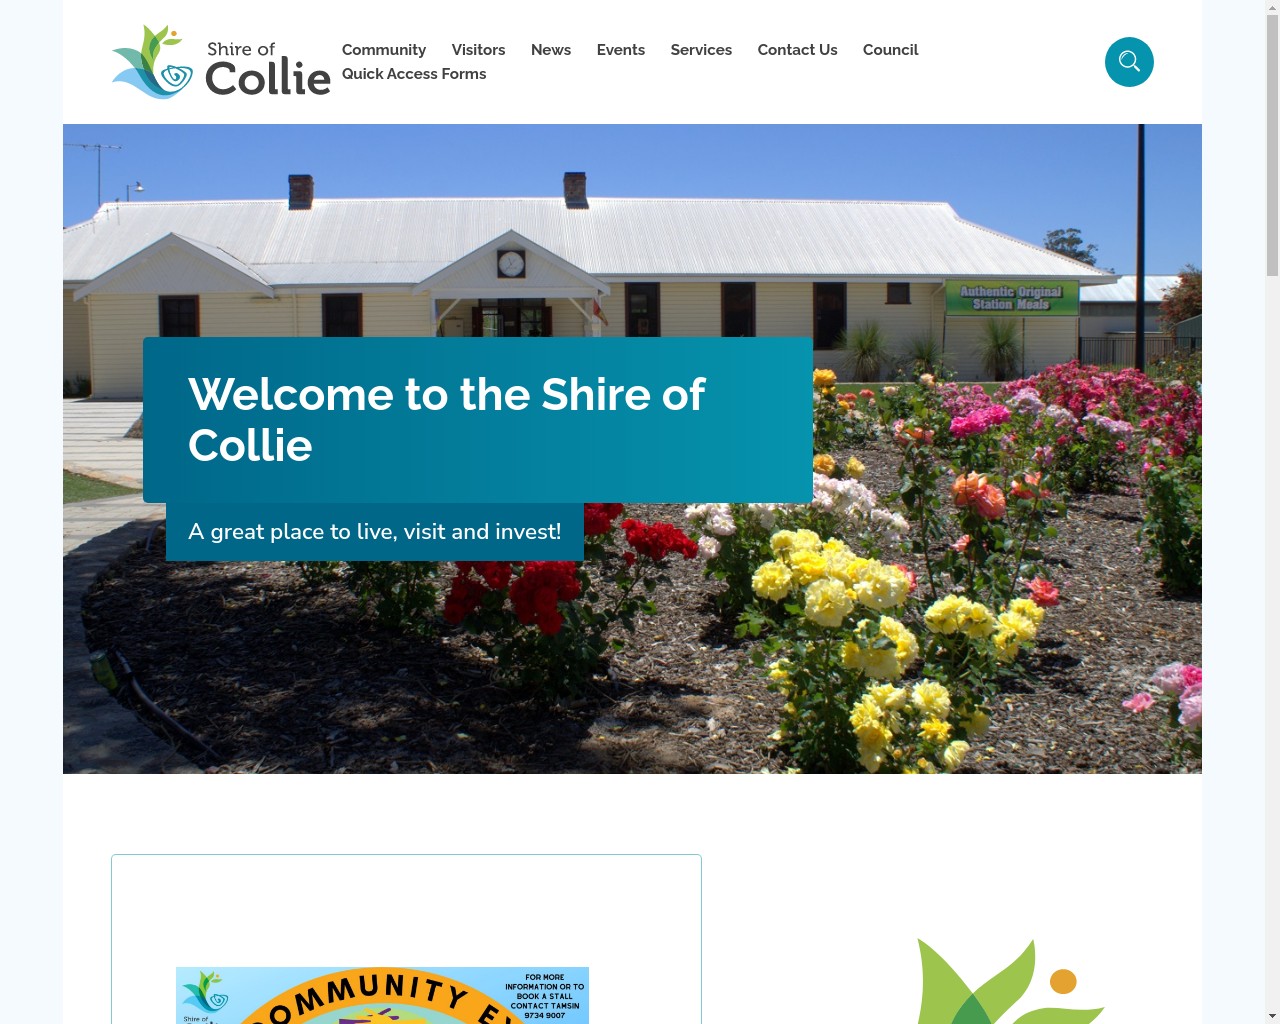 Shire of Collie